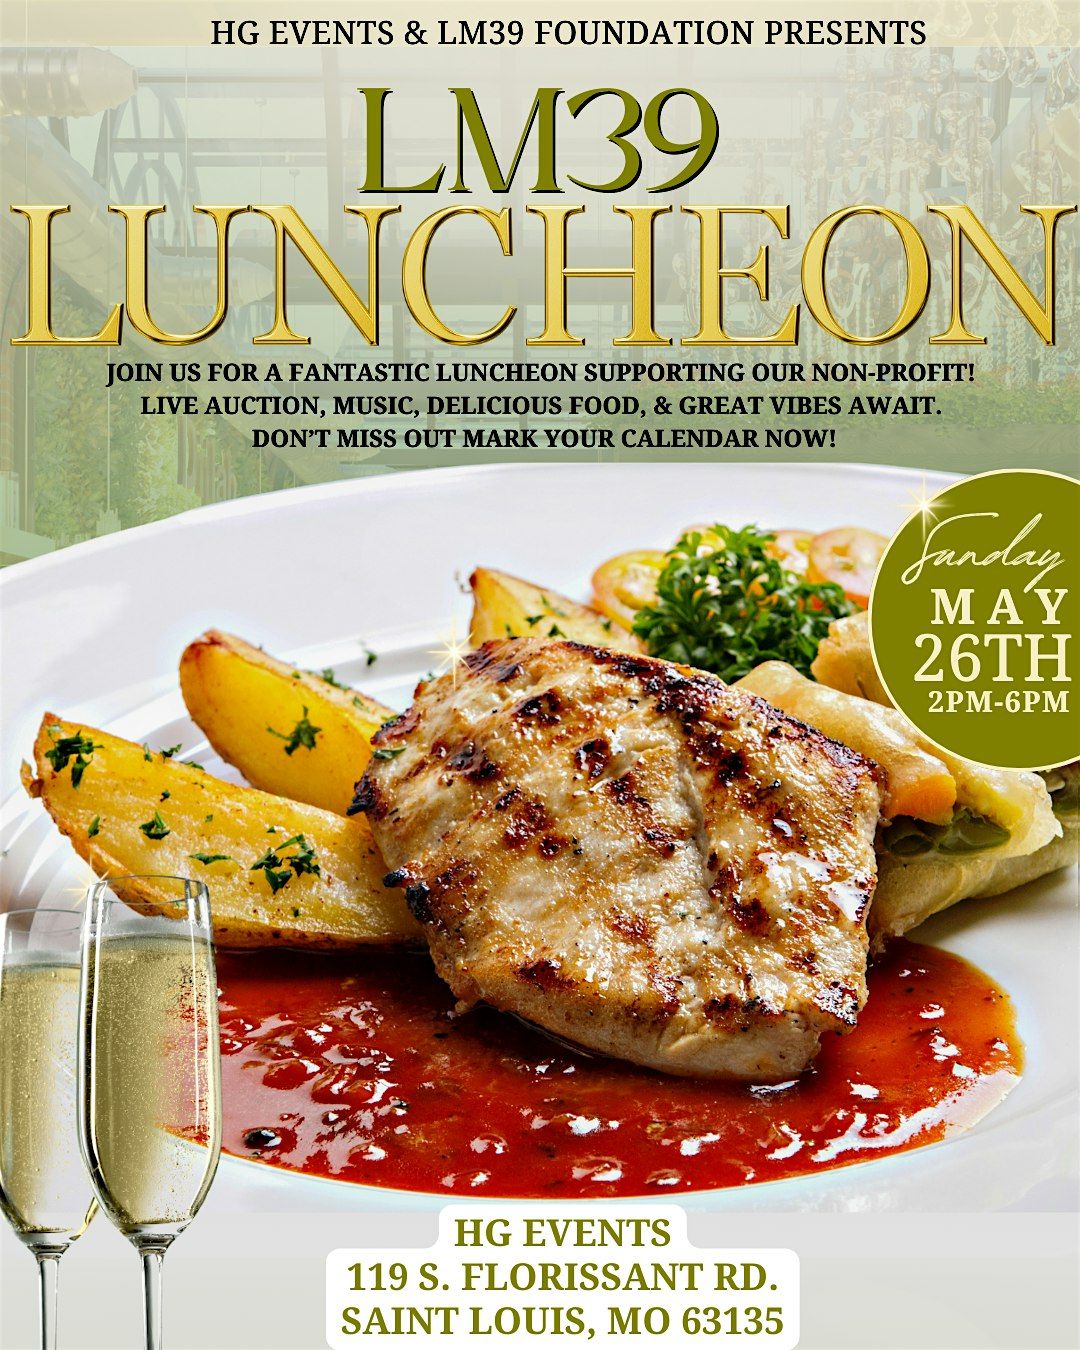 LM39 Foundation's Charity Luncheon